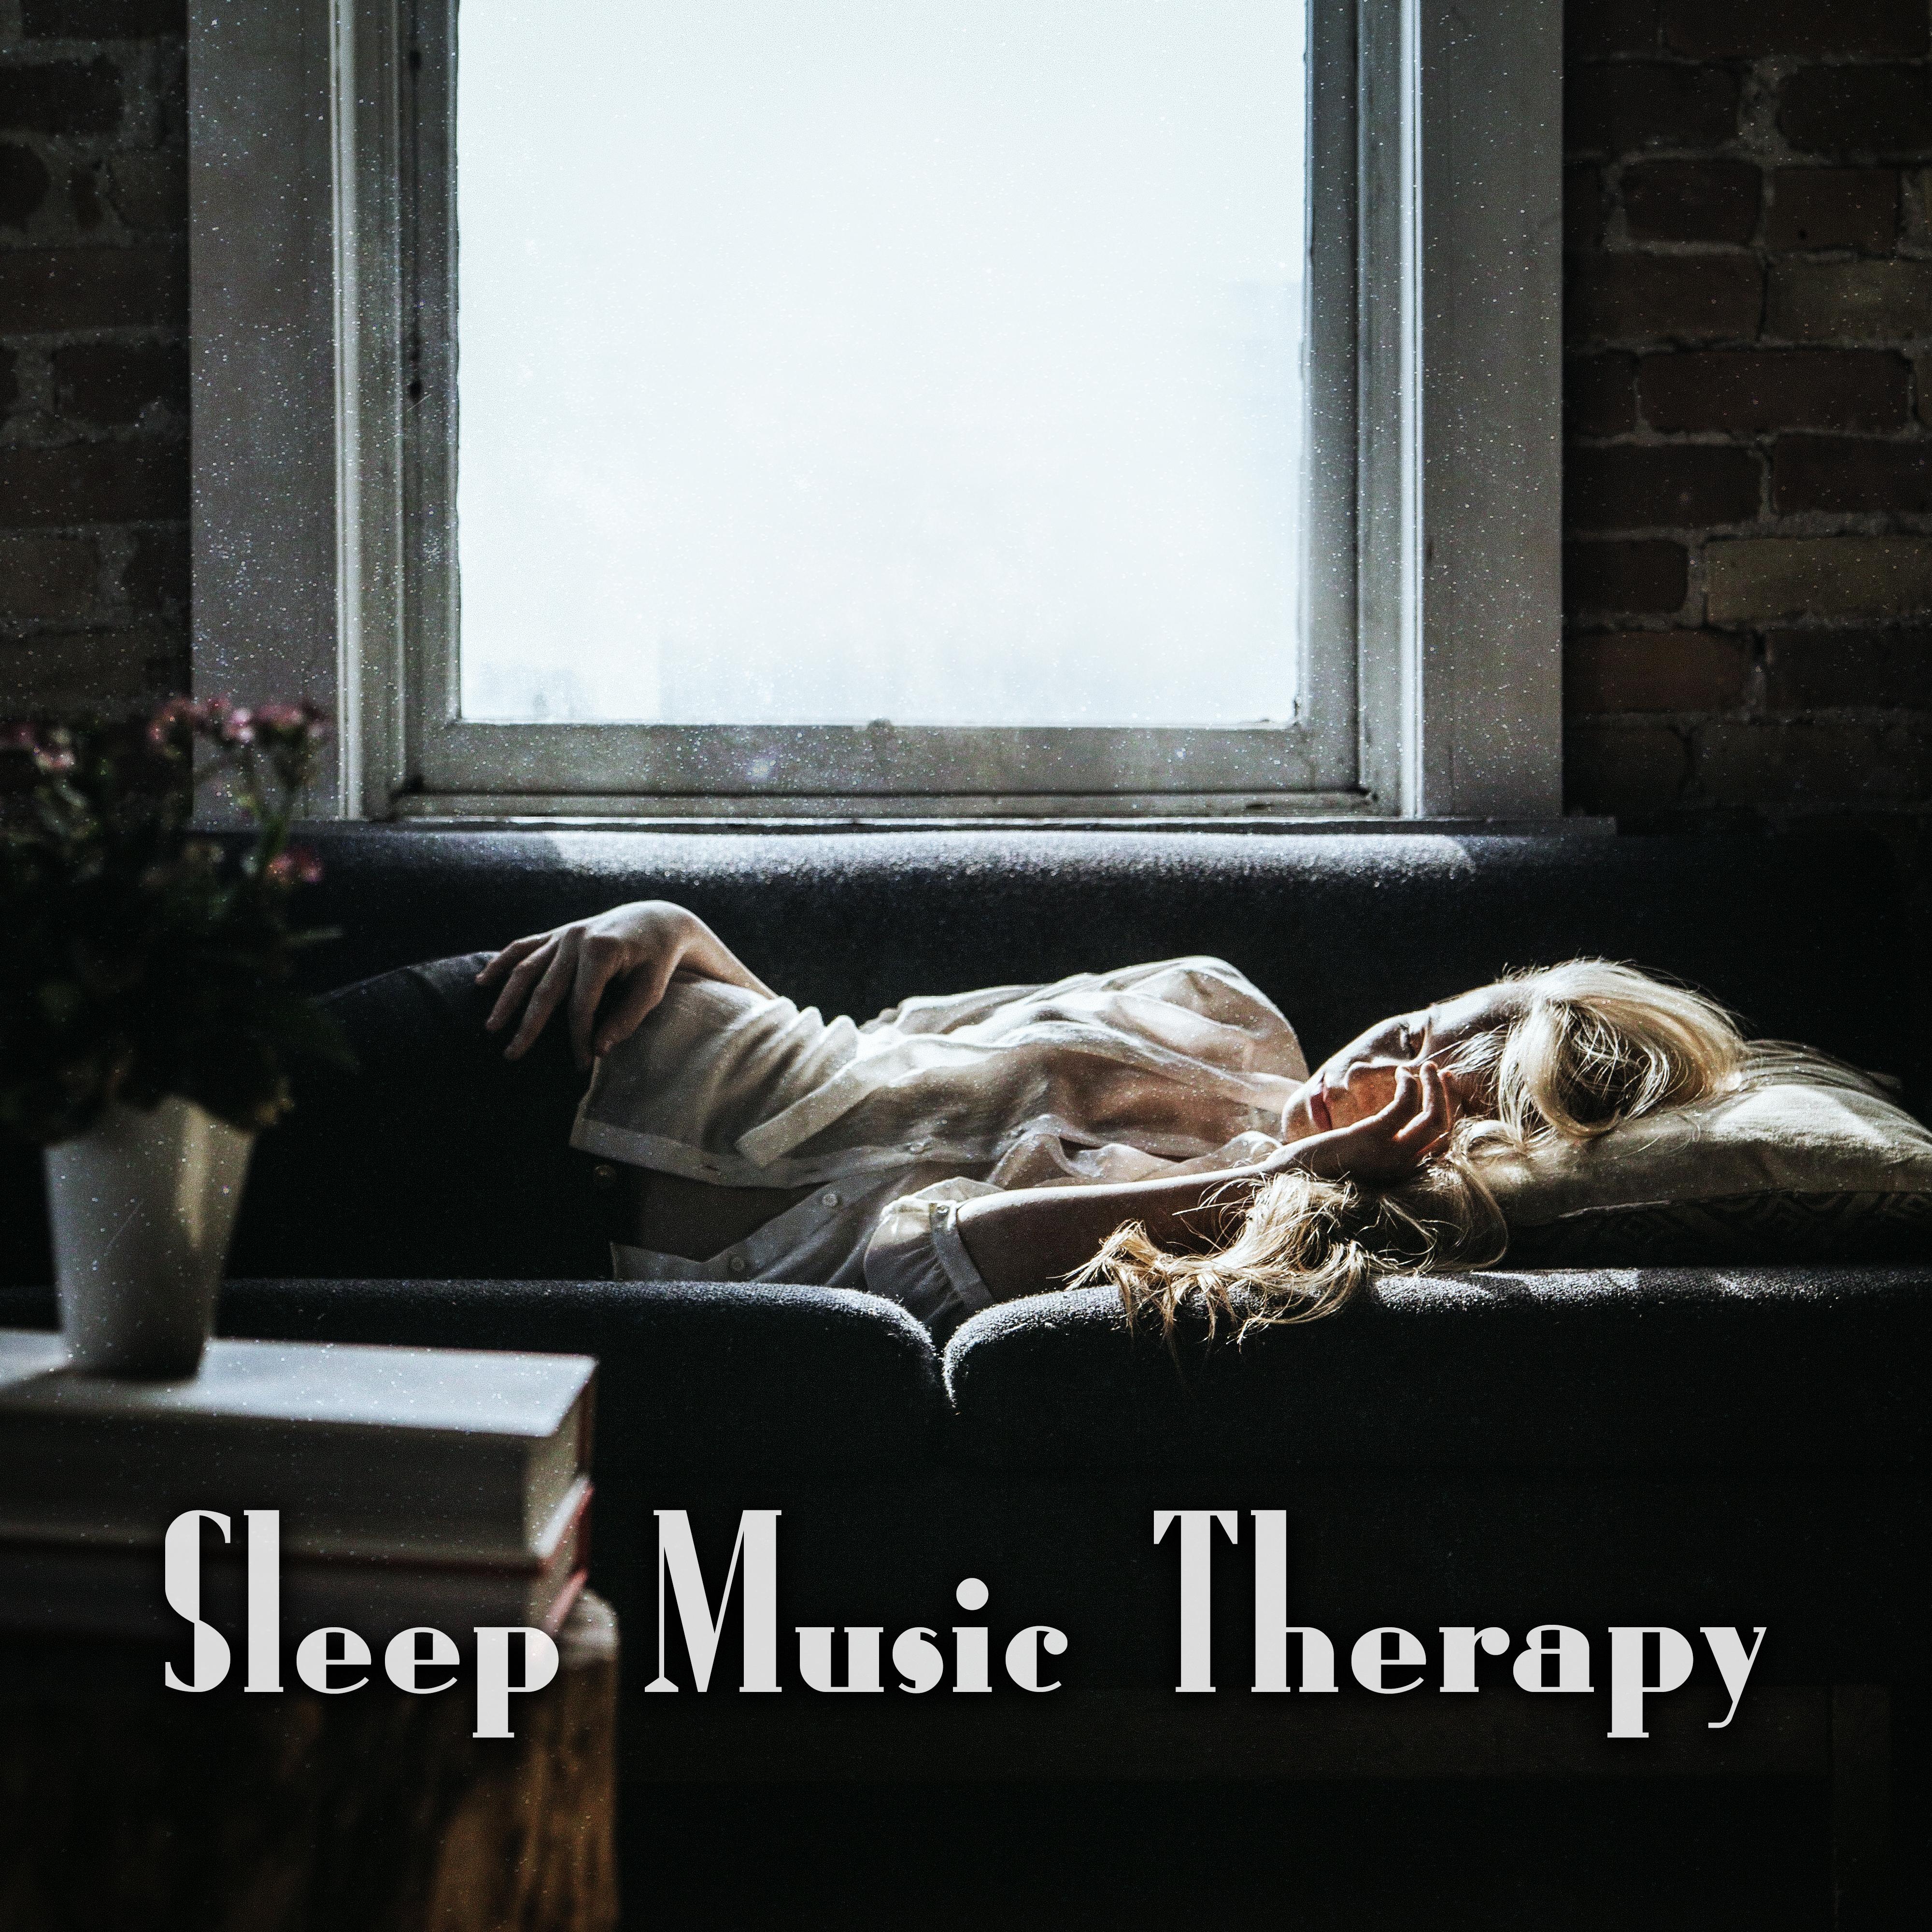 Sleep Music Therapy – Nature Sounds, Music for Deep Sleep, Pure Relaxation, Ocean Waves, Cure Insomnia, Rest